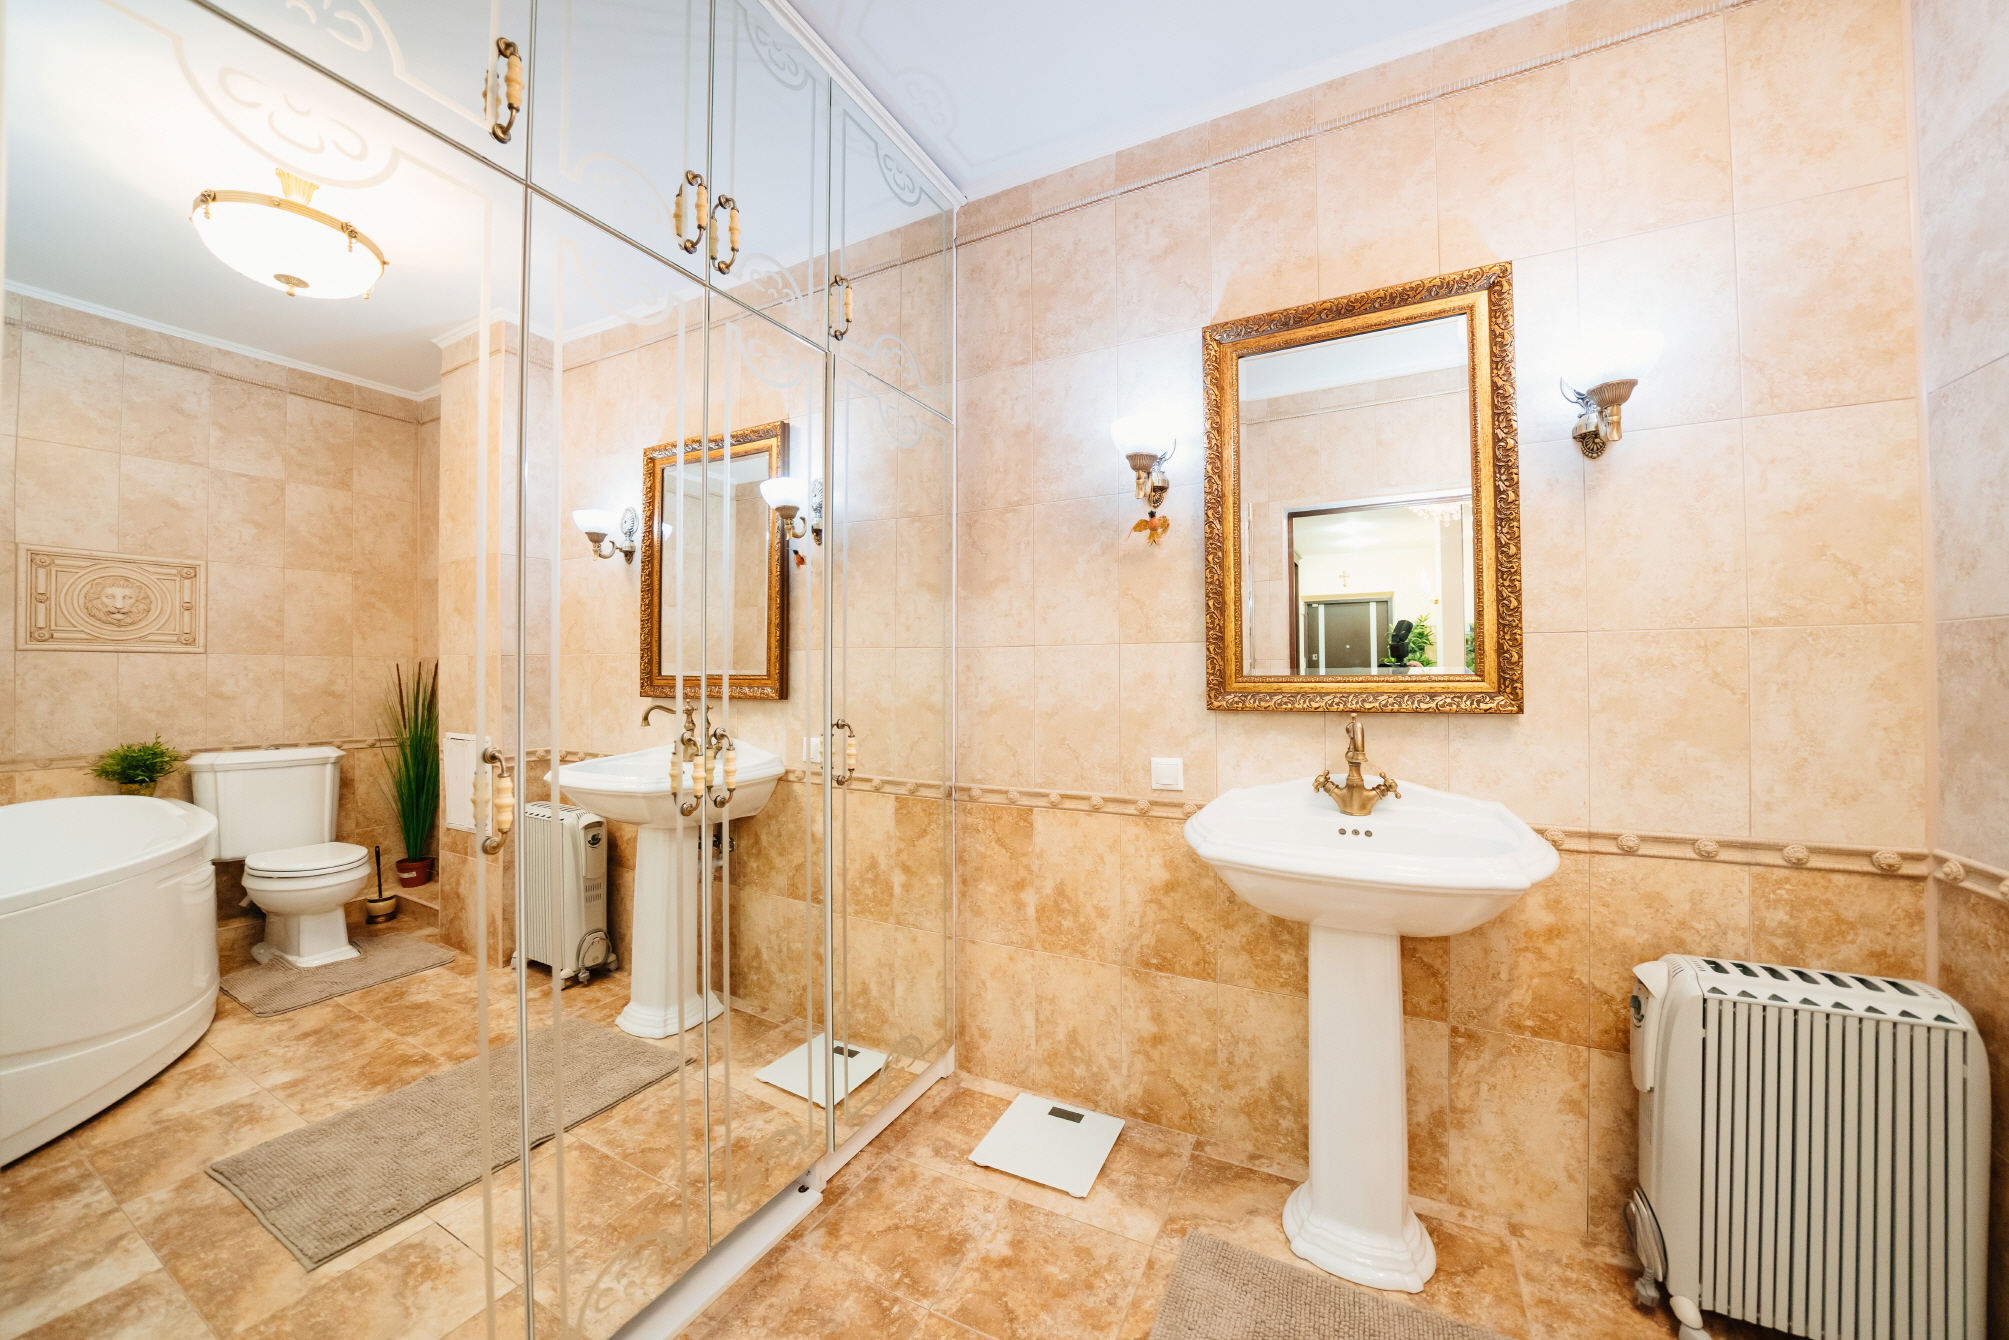 Large mirrors double the bathroom's size by reflecting light and space.